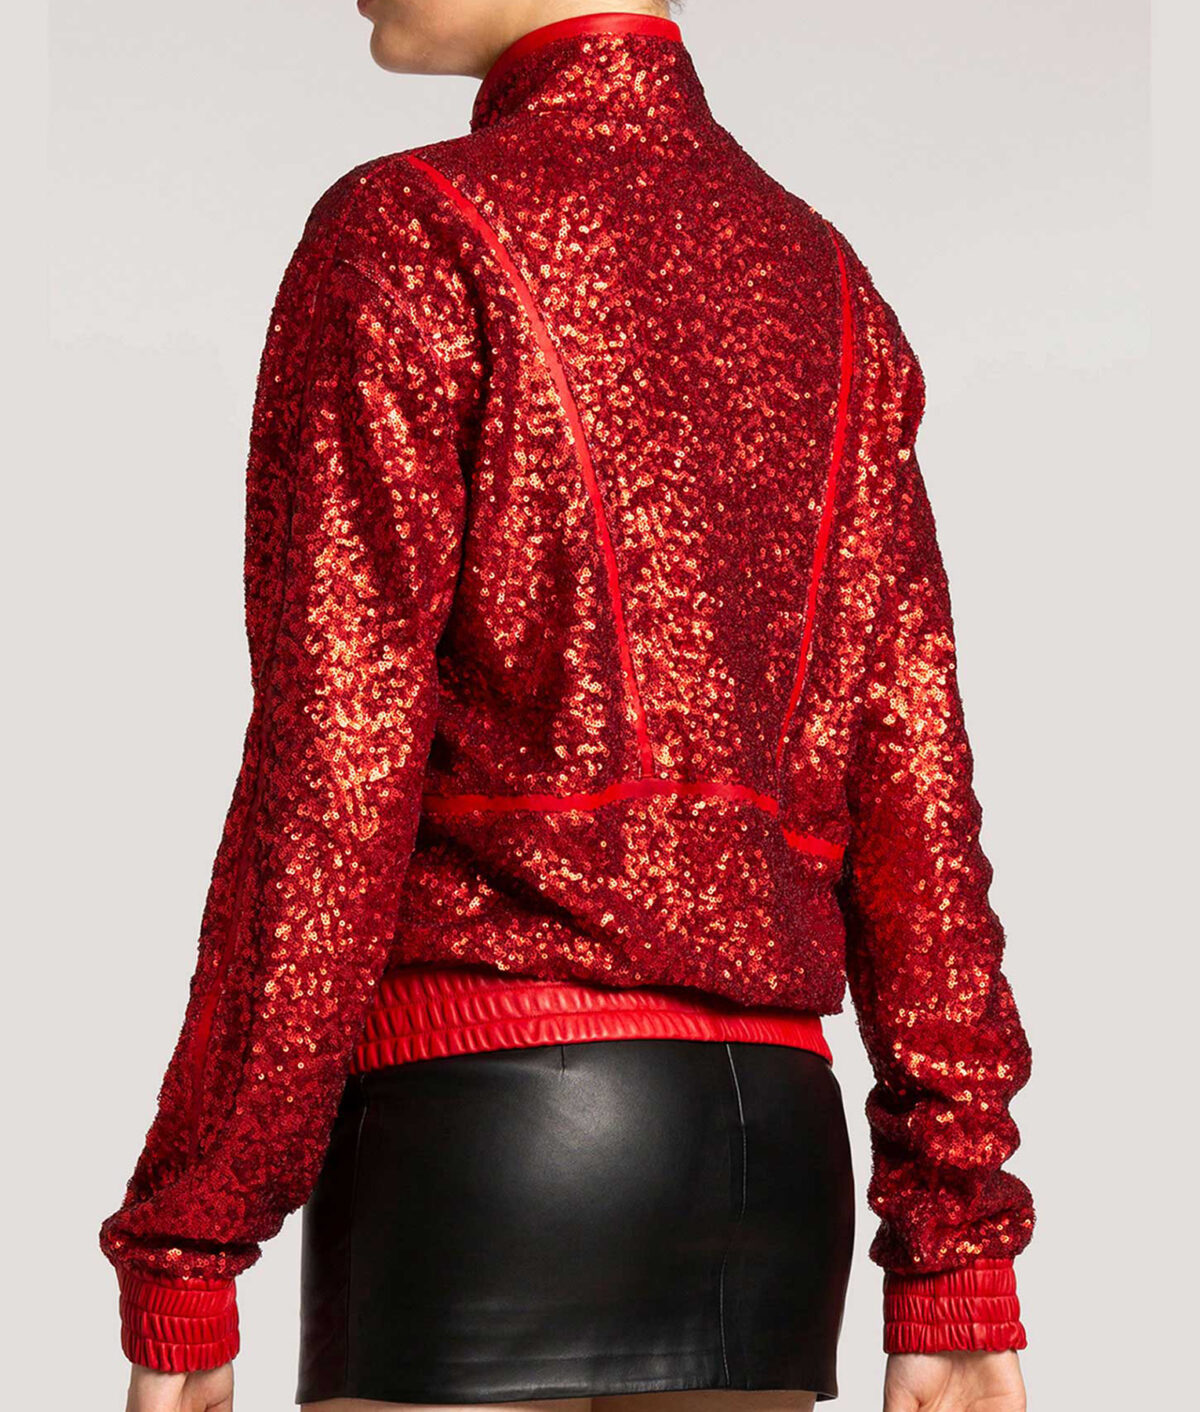 Womens Sequin Red Leather Bomber Jacket